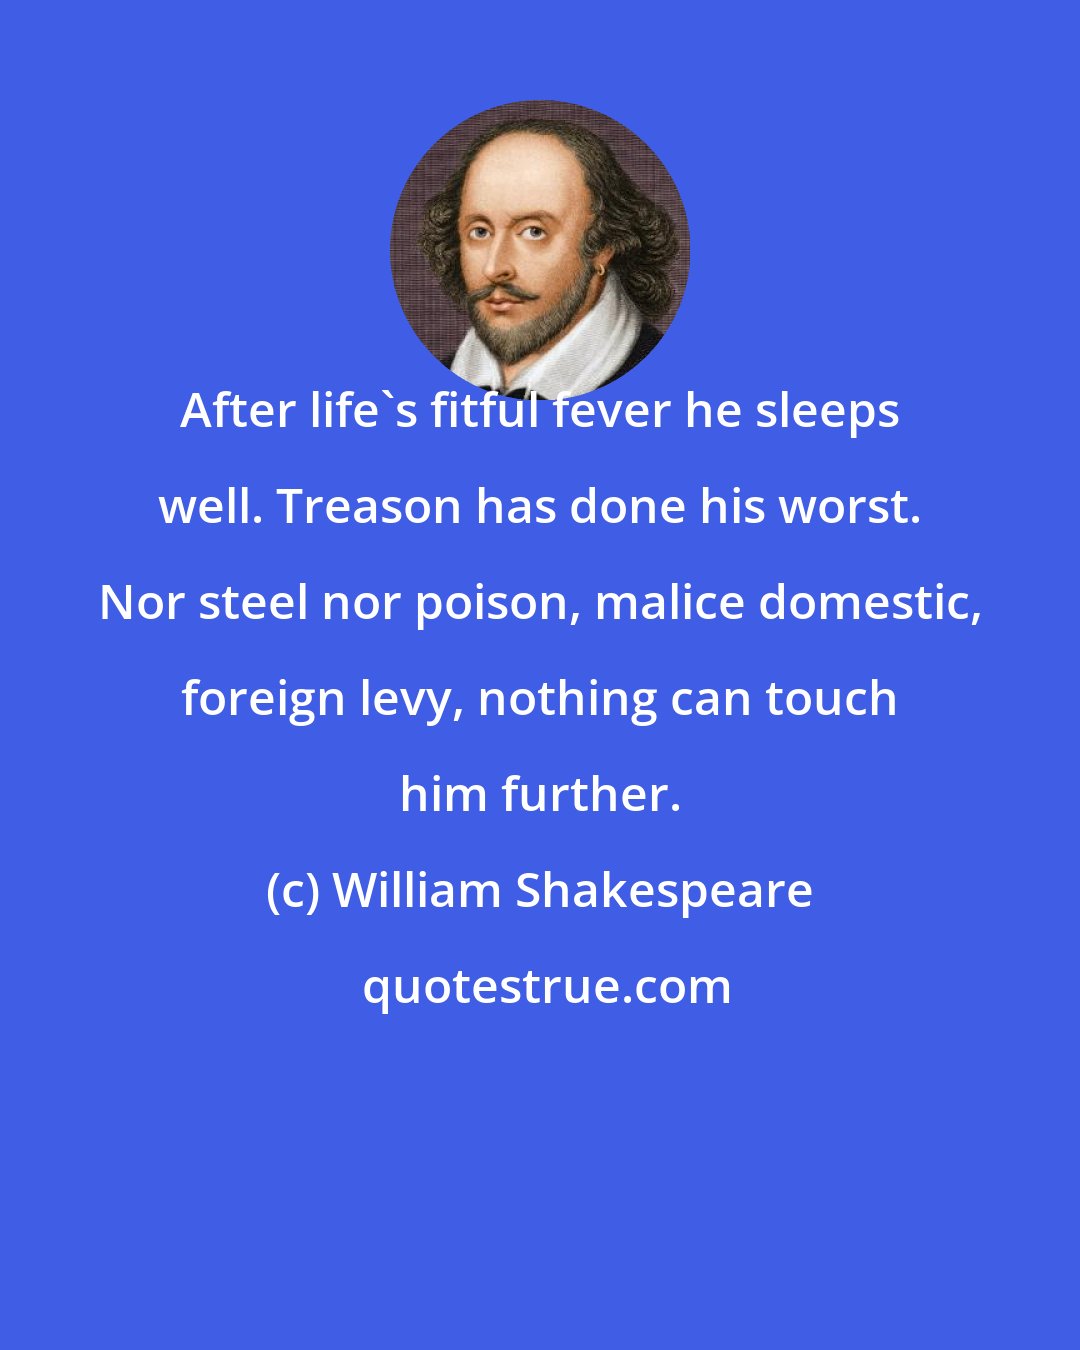 William Shakespeare: After life's fitful fever he sleeps well. Treason has done his worst. Nor steel nor poison, malice domestic, foreign levy, nothing can touch him further.